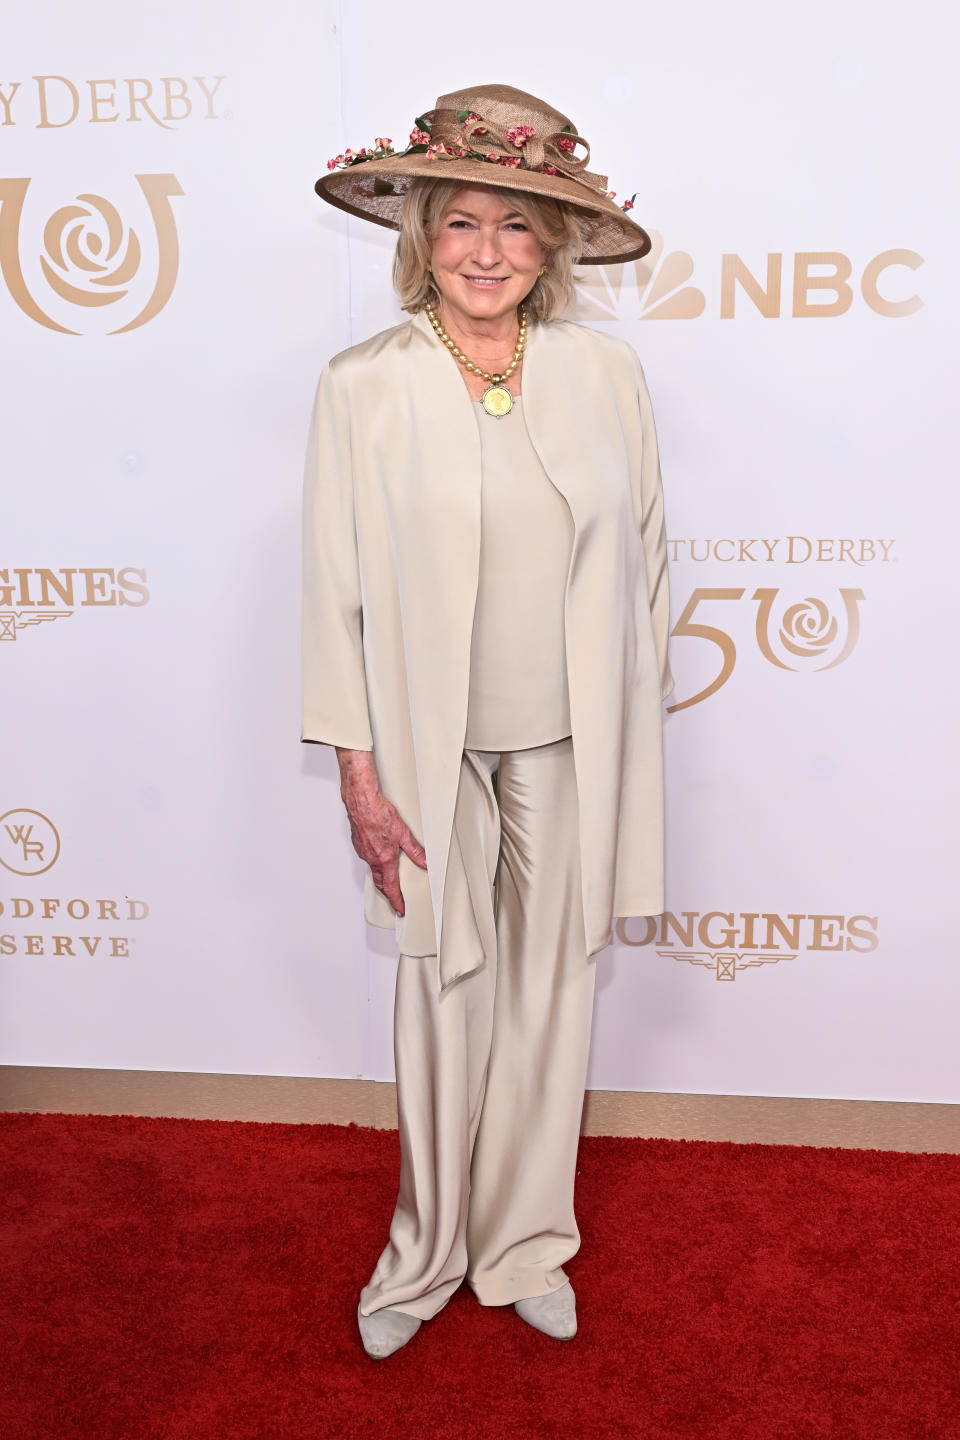 LOUISVILLE, KENTUCKY - MAY 04: Martha Stewart attends the Kentucky Derby 150 at Churchill Downs on May 04, 2024 in Louisville, Kentucky. (Photo by Daniel Boczarski/Getty Images for Churchill Downs)